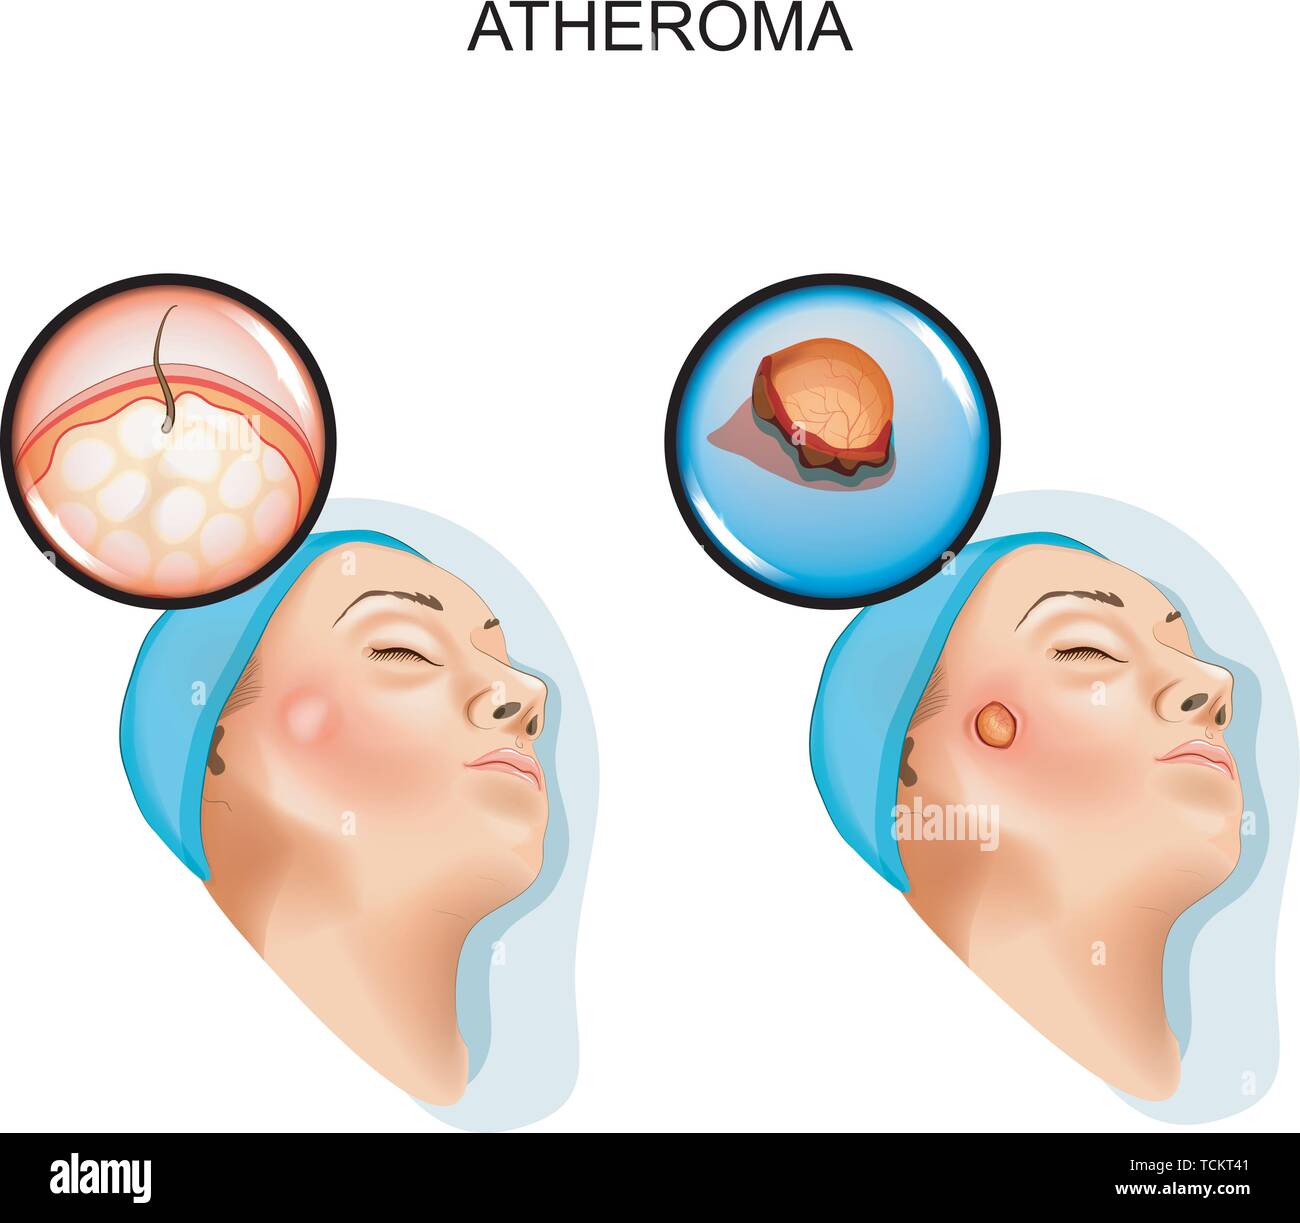 vector illustration of surgery of benign tumors of atheroma Stock Vector